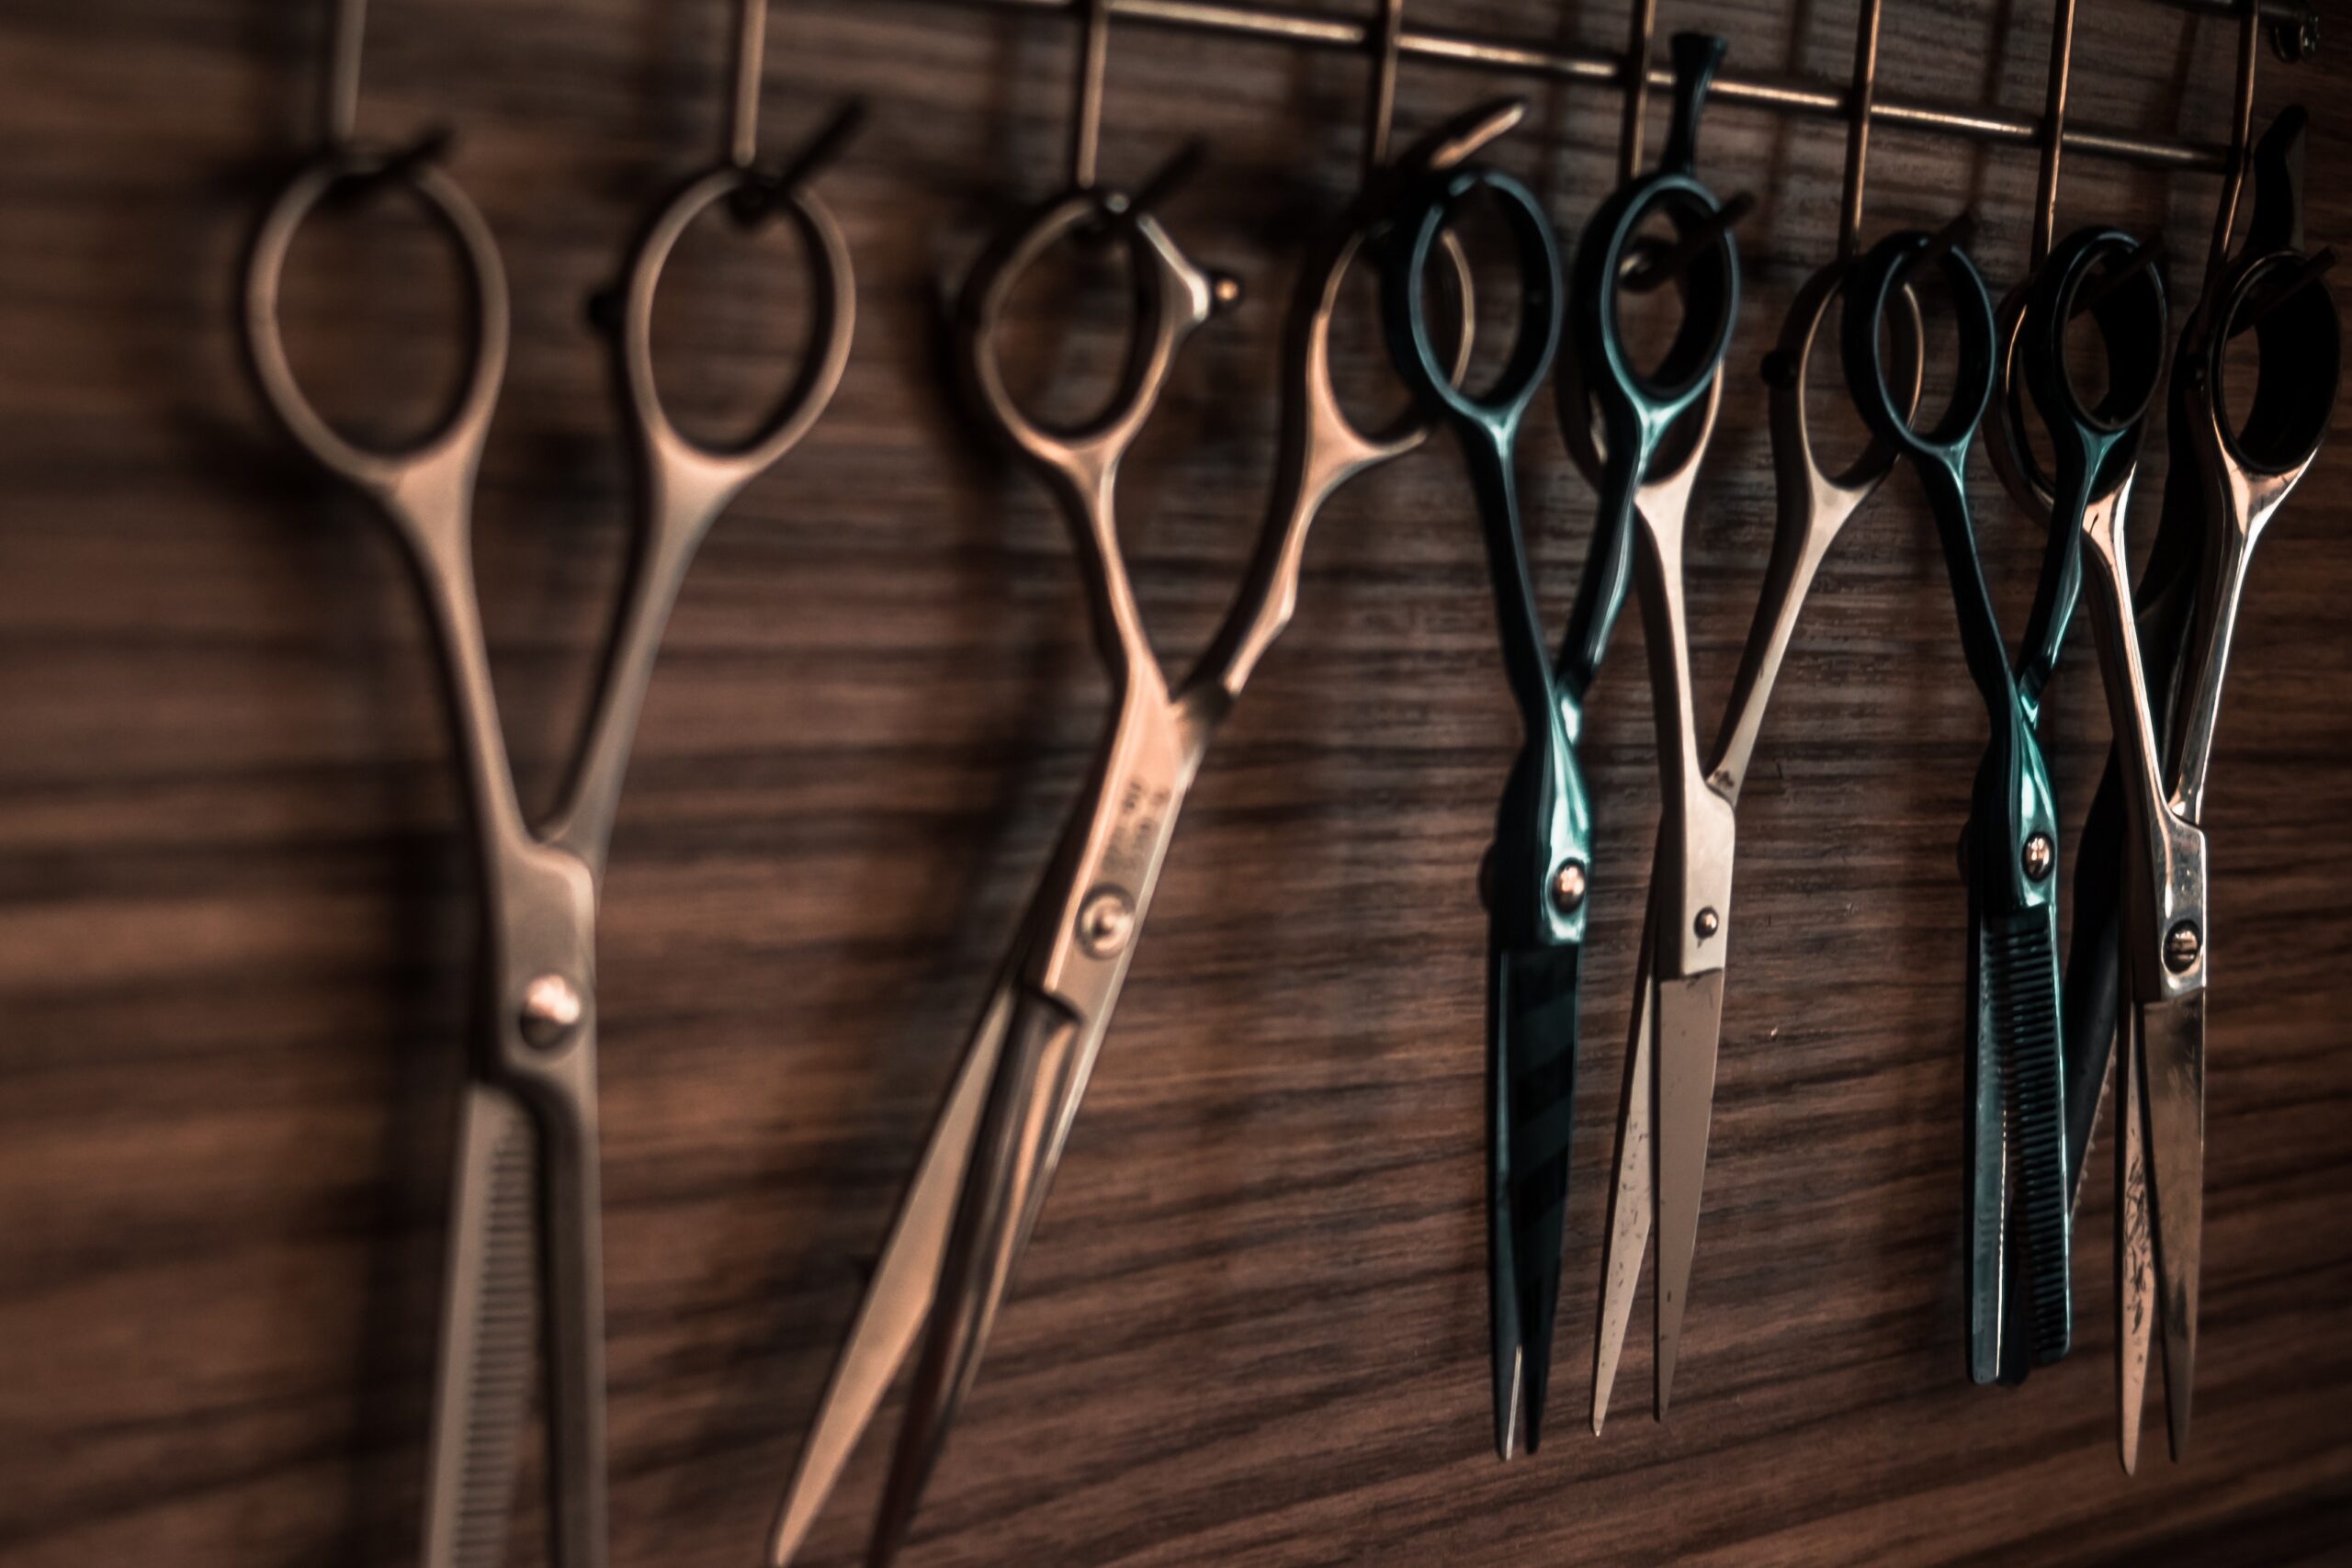 Several pairs of scissors hanging on hooks